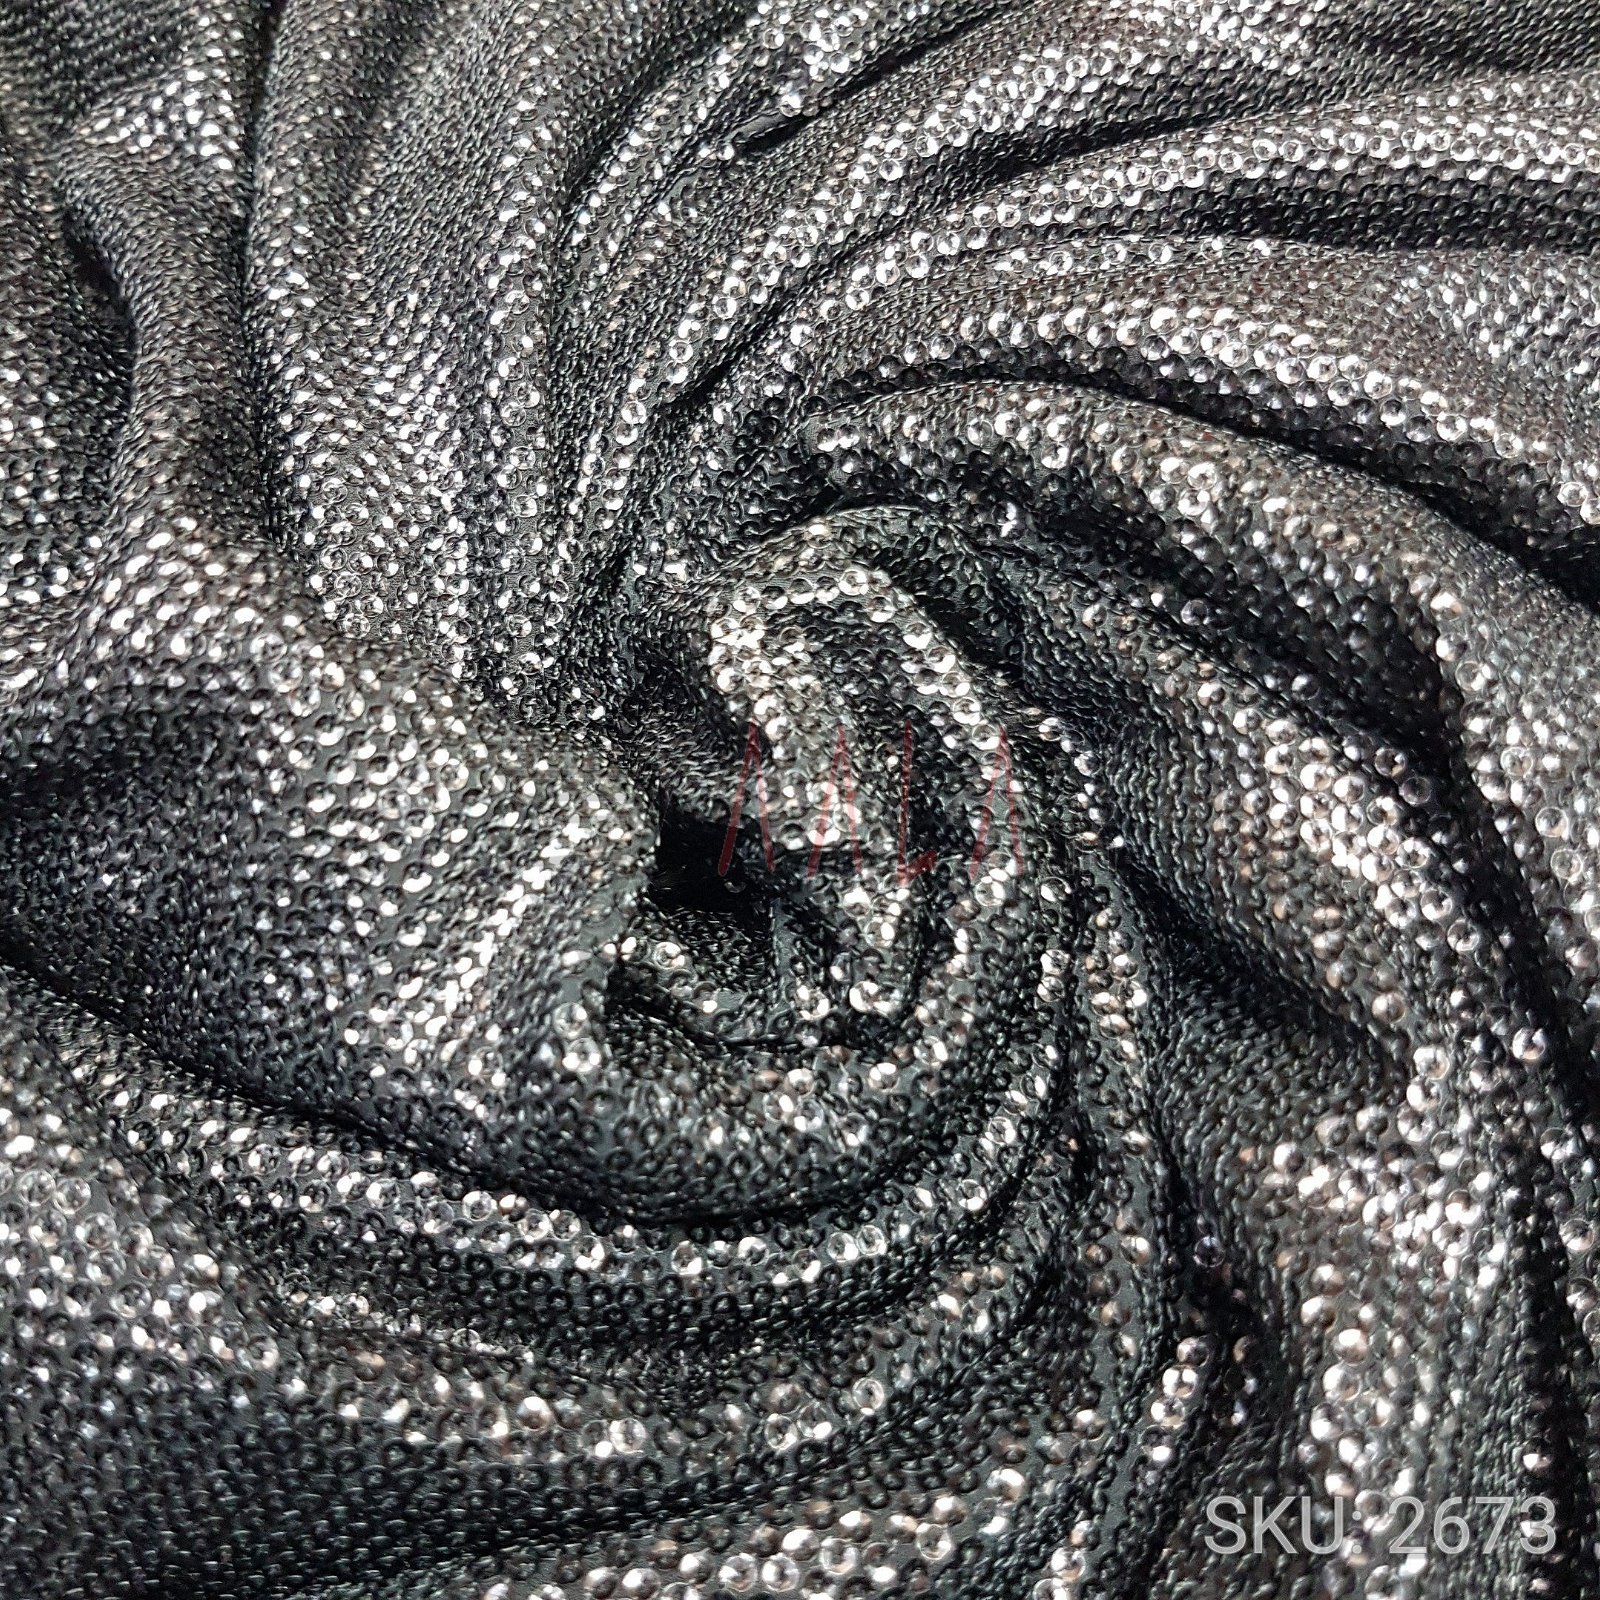 Katori Sequins Georgette Viscose 44 Inches Dyed Per Metre #2673